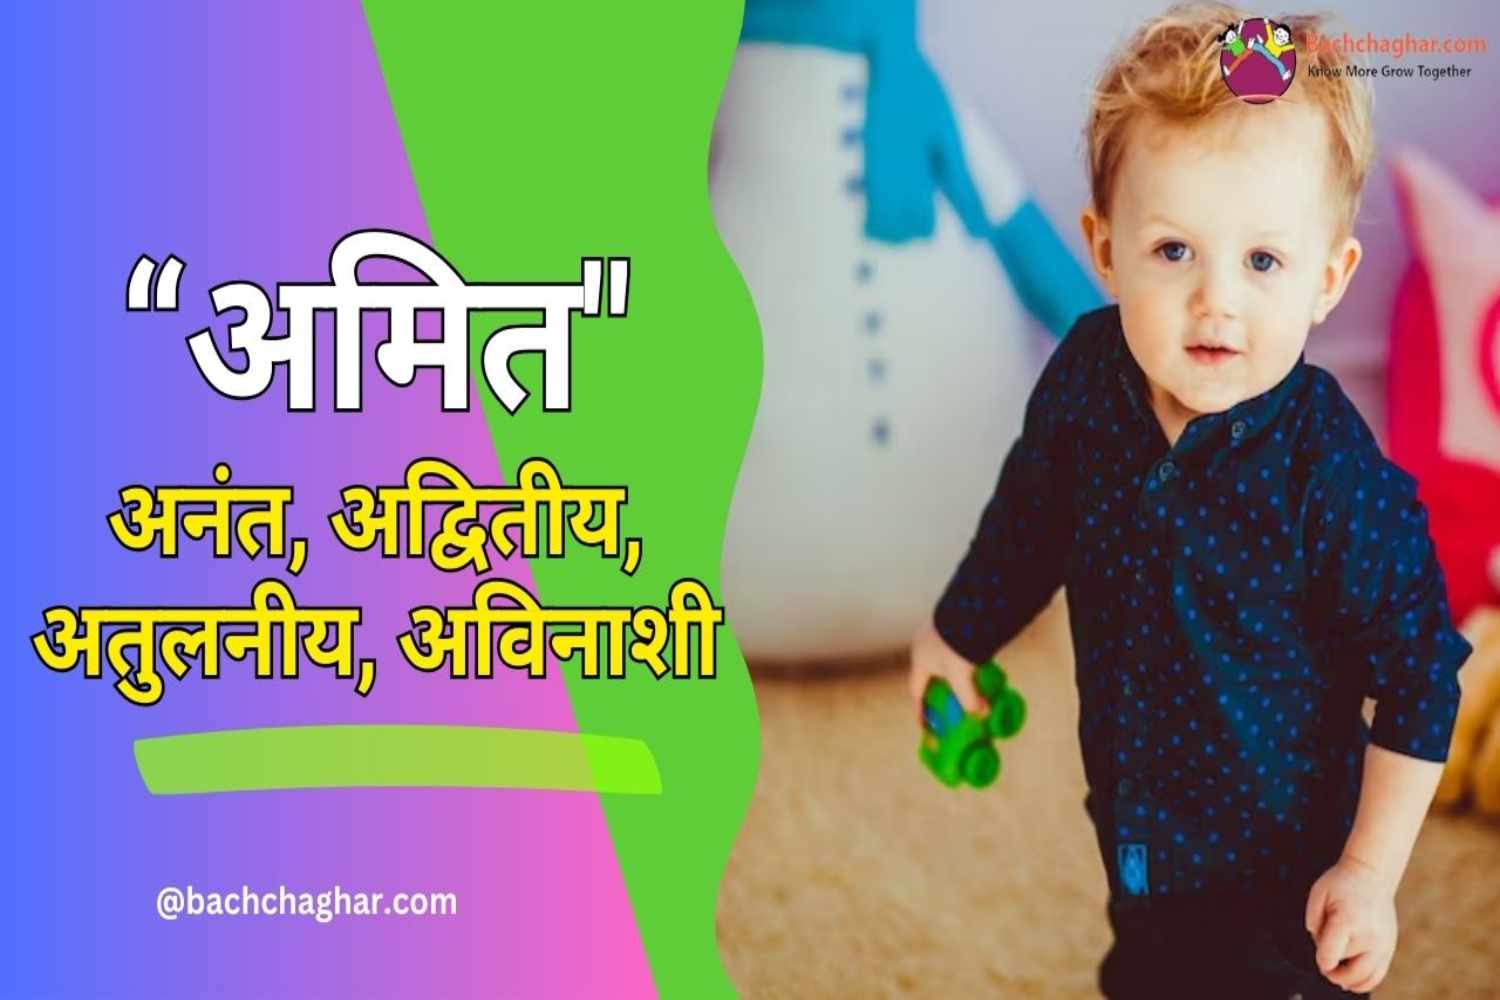 amit-meaning-in-hindi